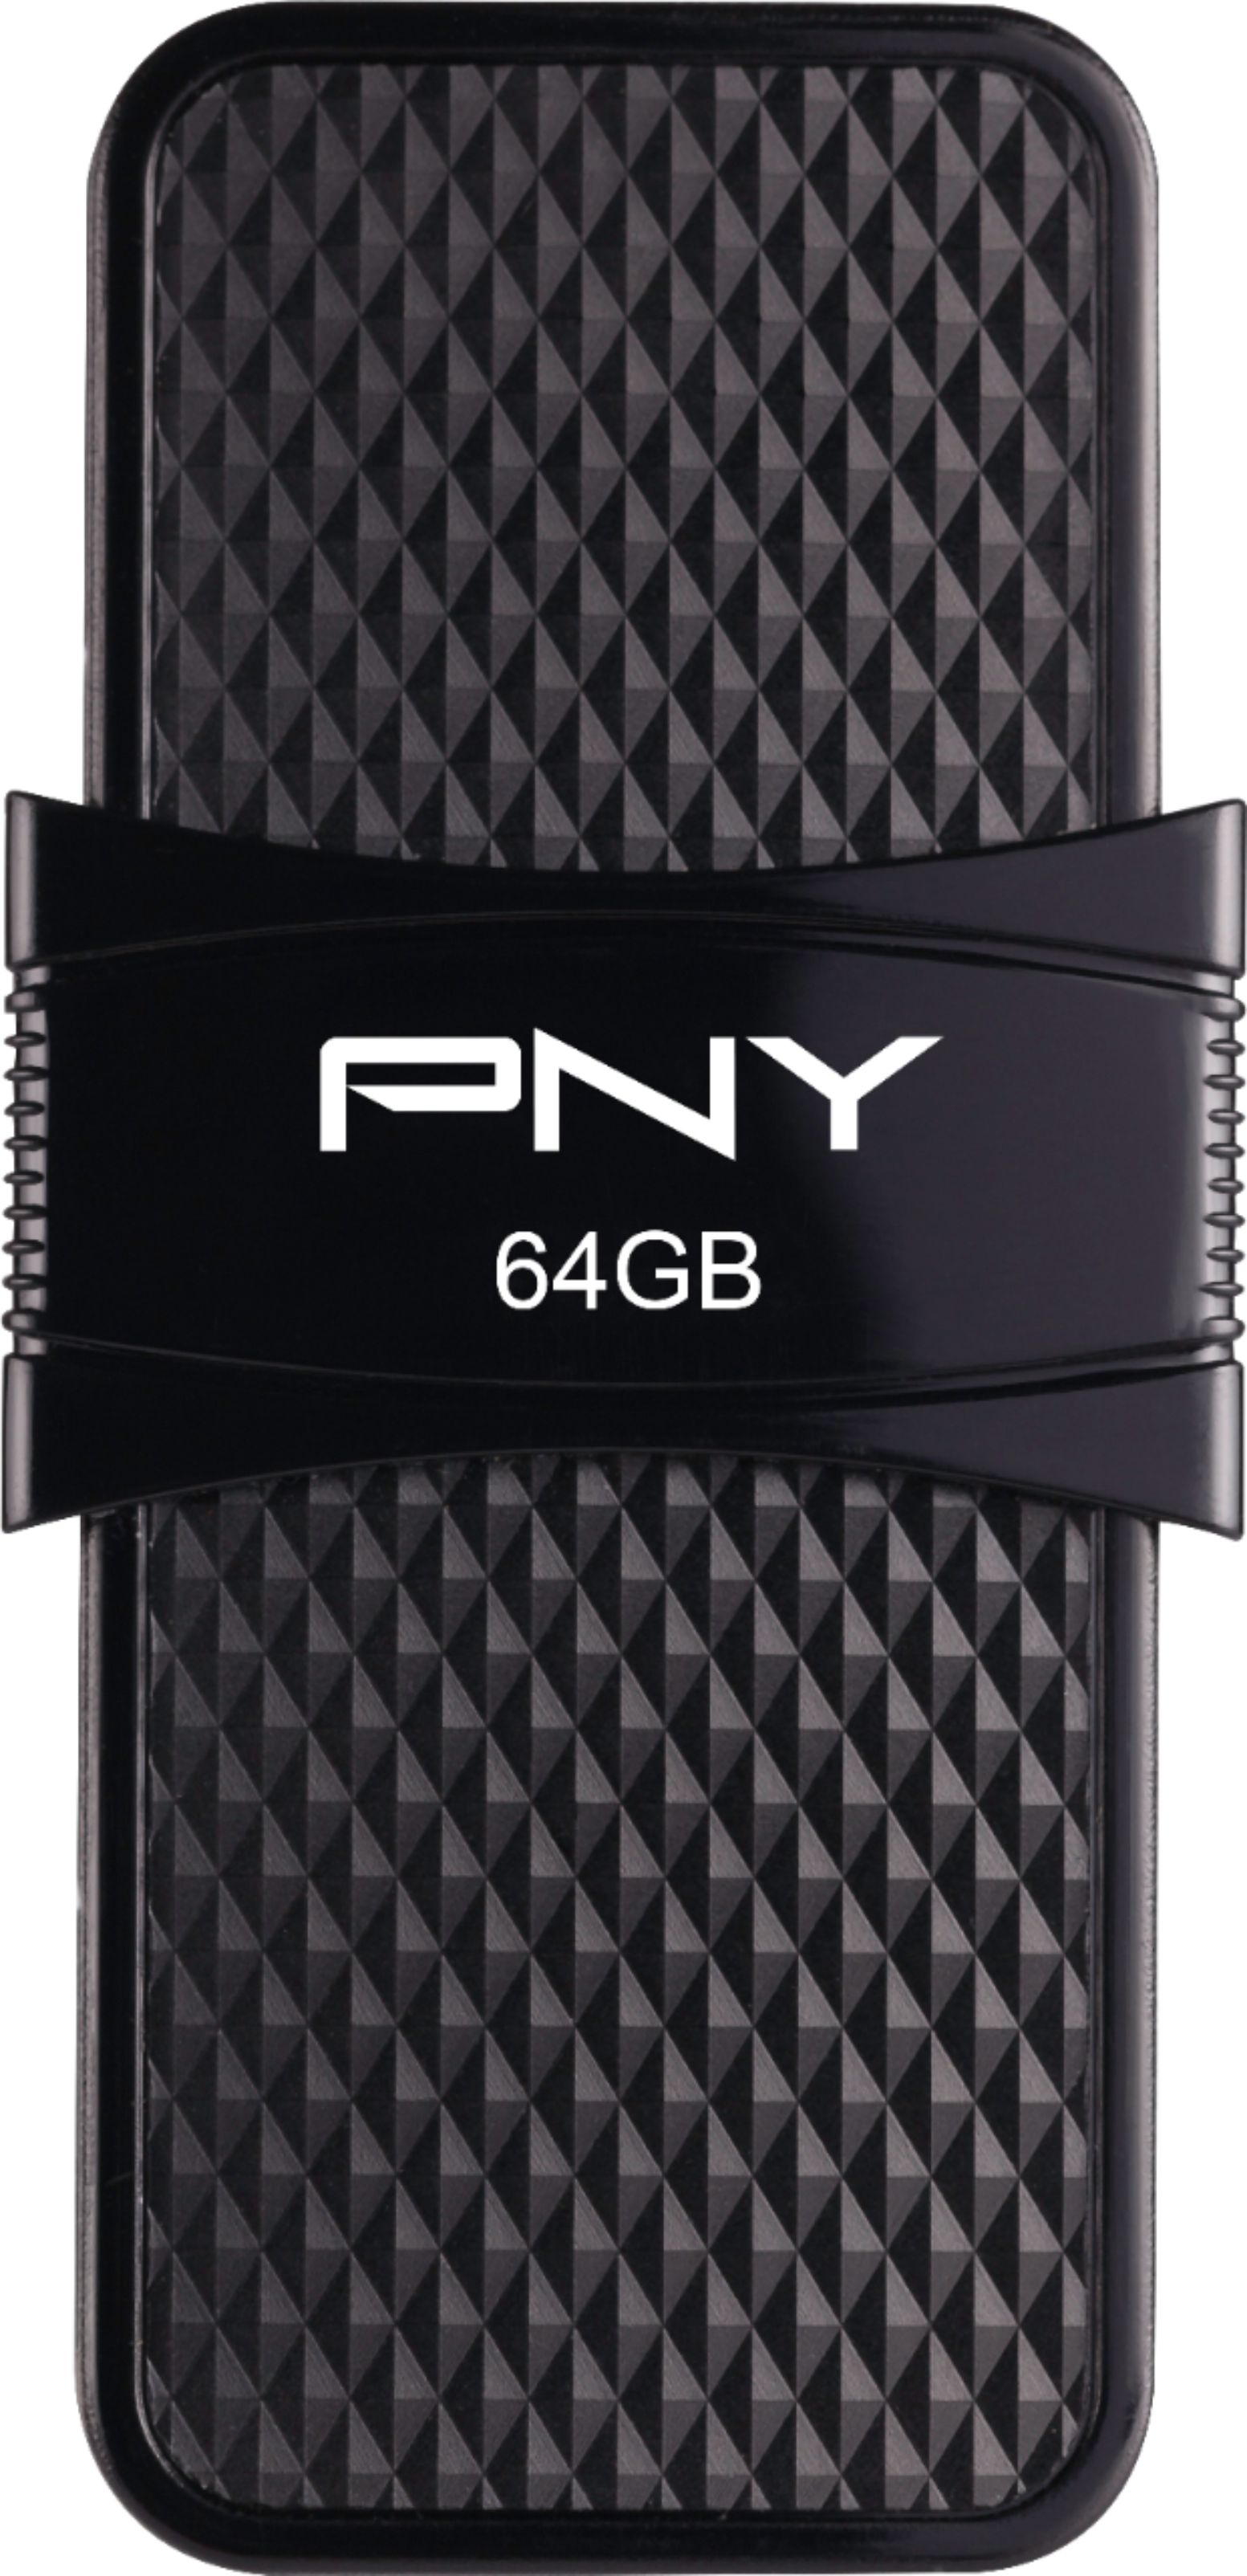 Questions and Answers: PNY 64GB Duo Link USB 3.1 Type-C OTG Flash